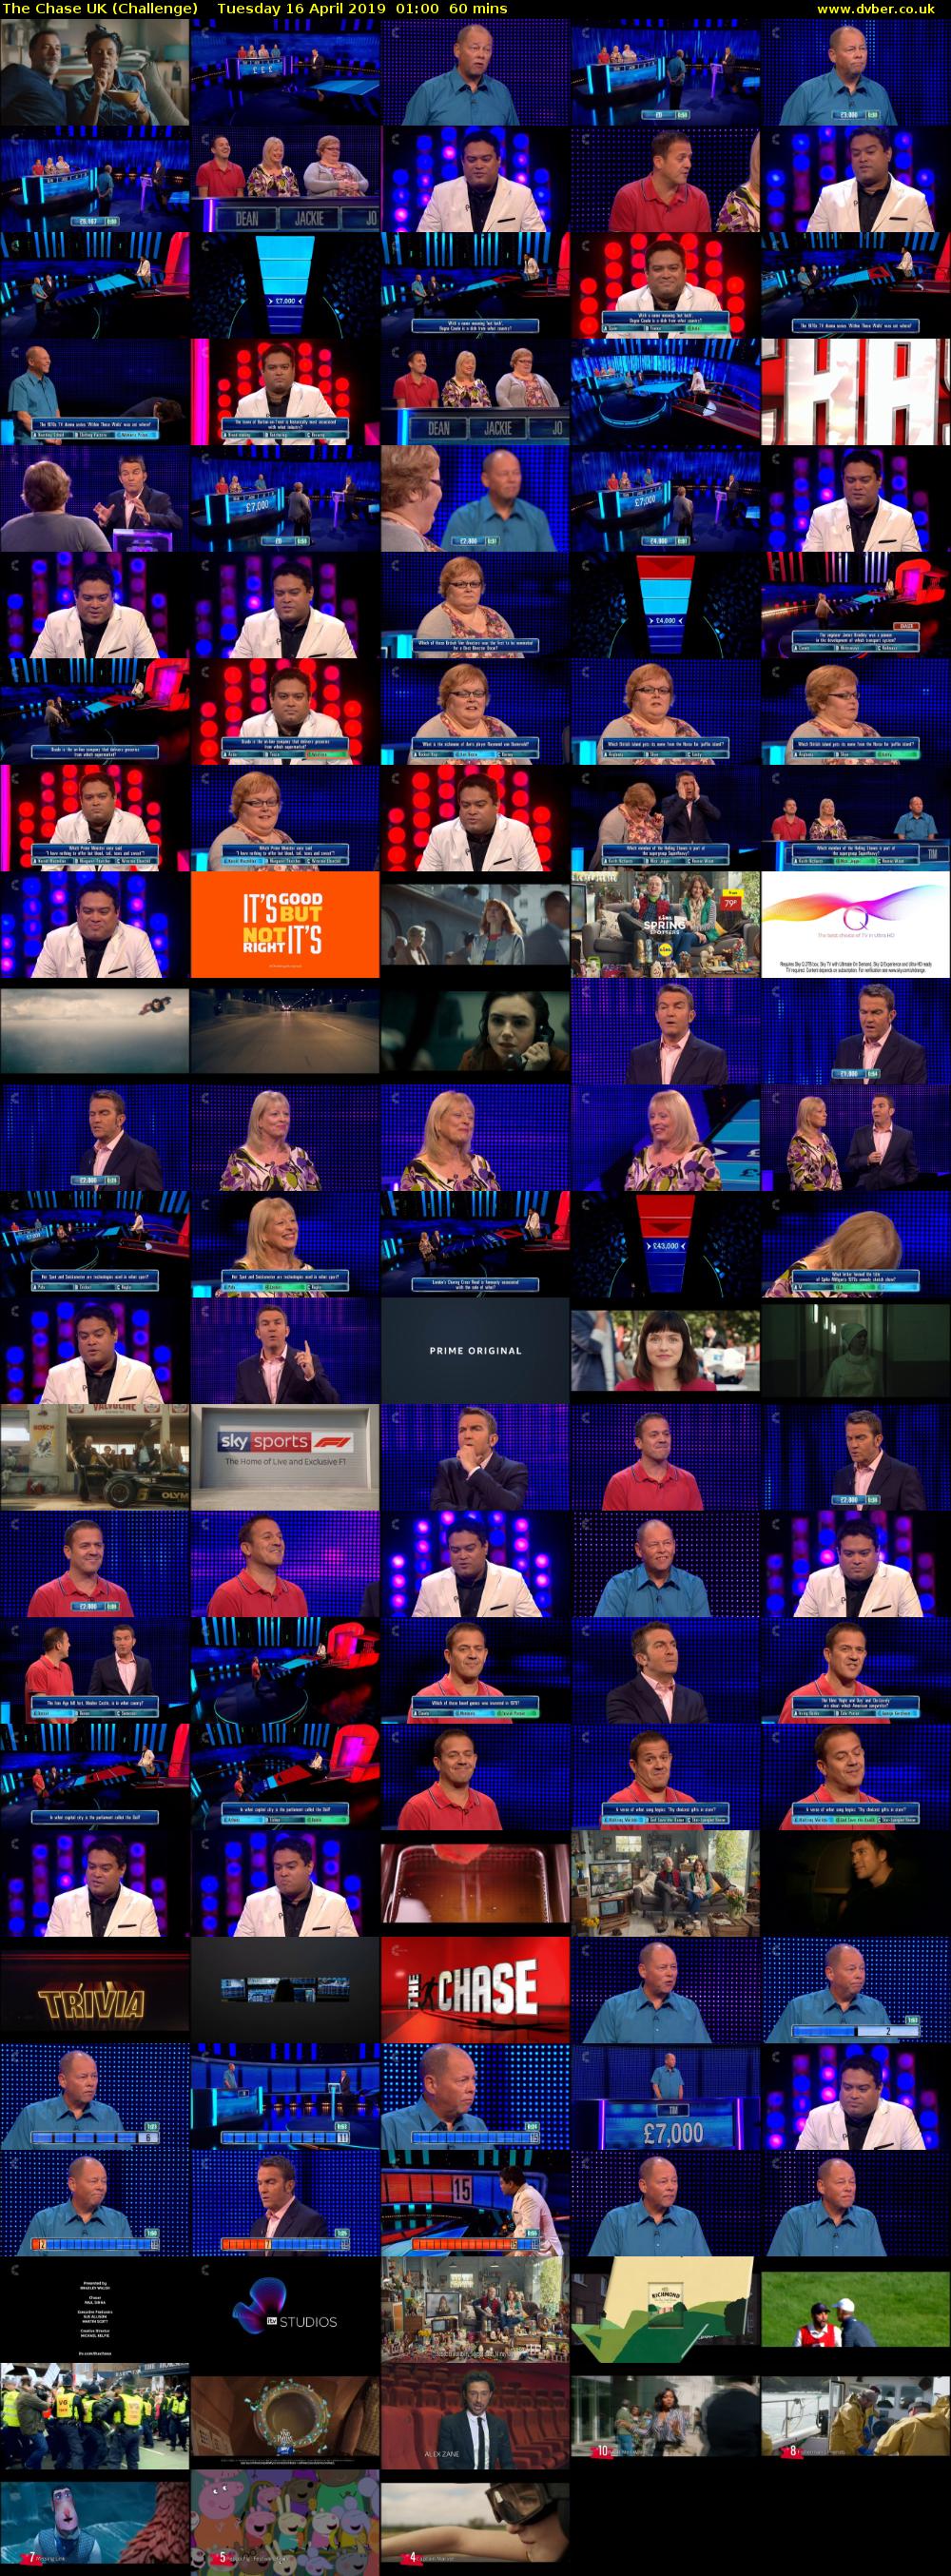 The Chase UK (Challenge) Tuesday 16 April 2019 01:00 - 02:00